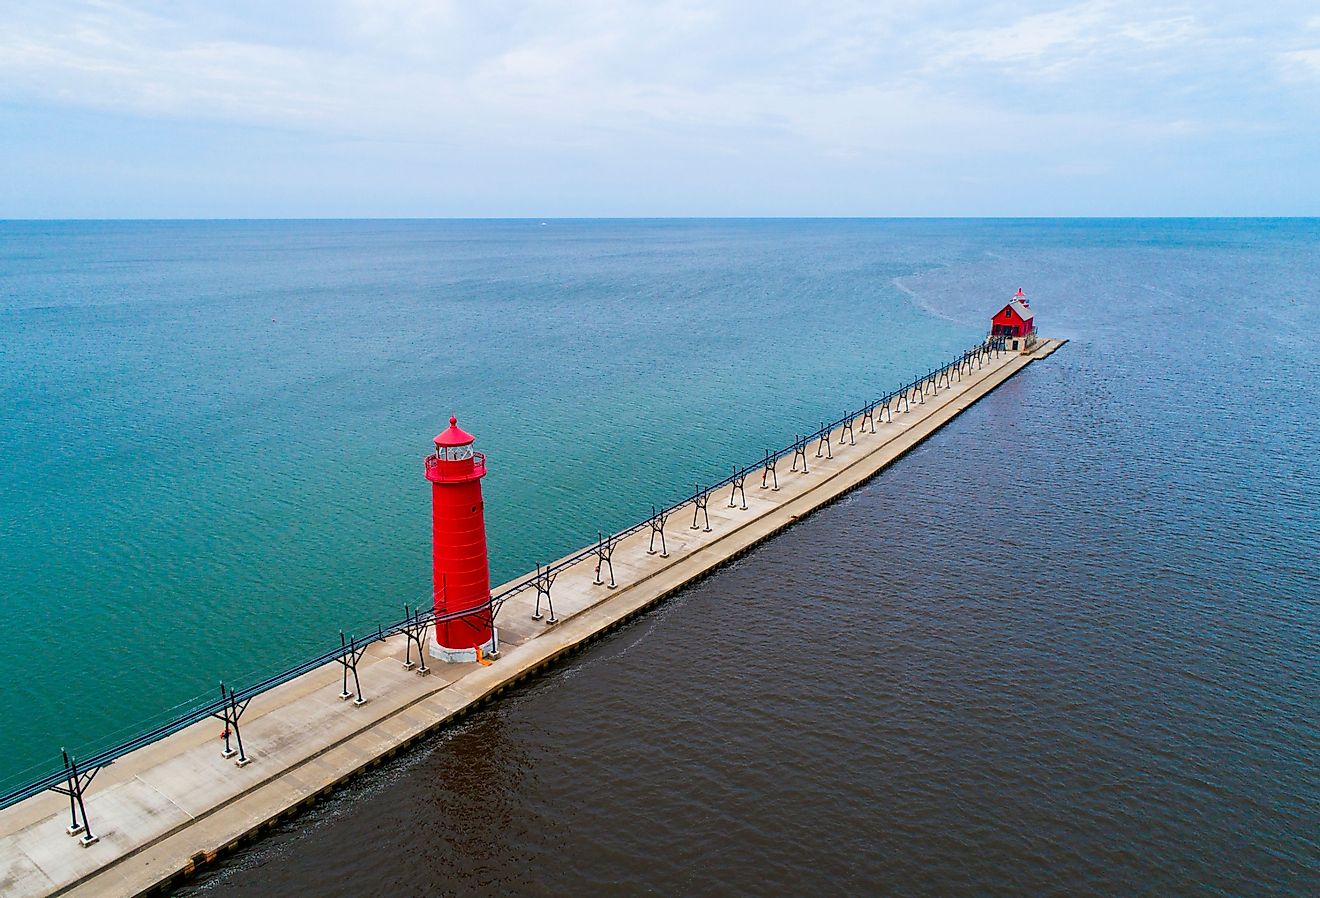 Aerial view of Grand Haven, Michigan lighthouse. Image credit Dennis MacDonald via Shutterstock.